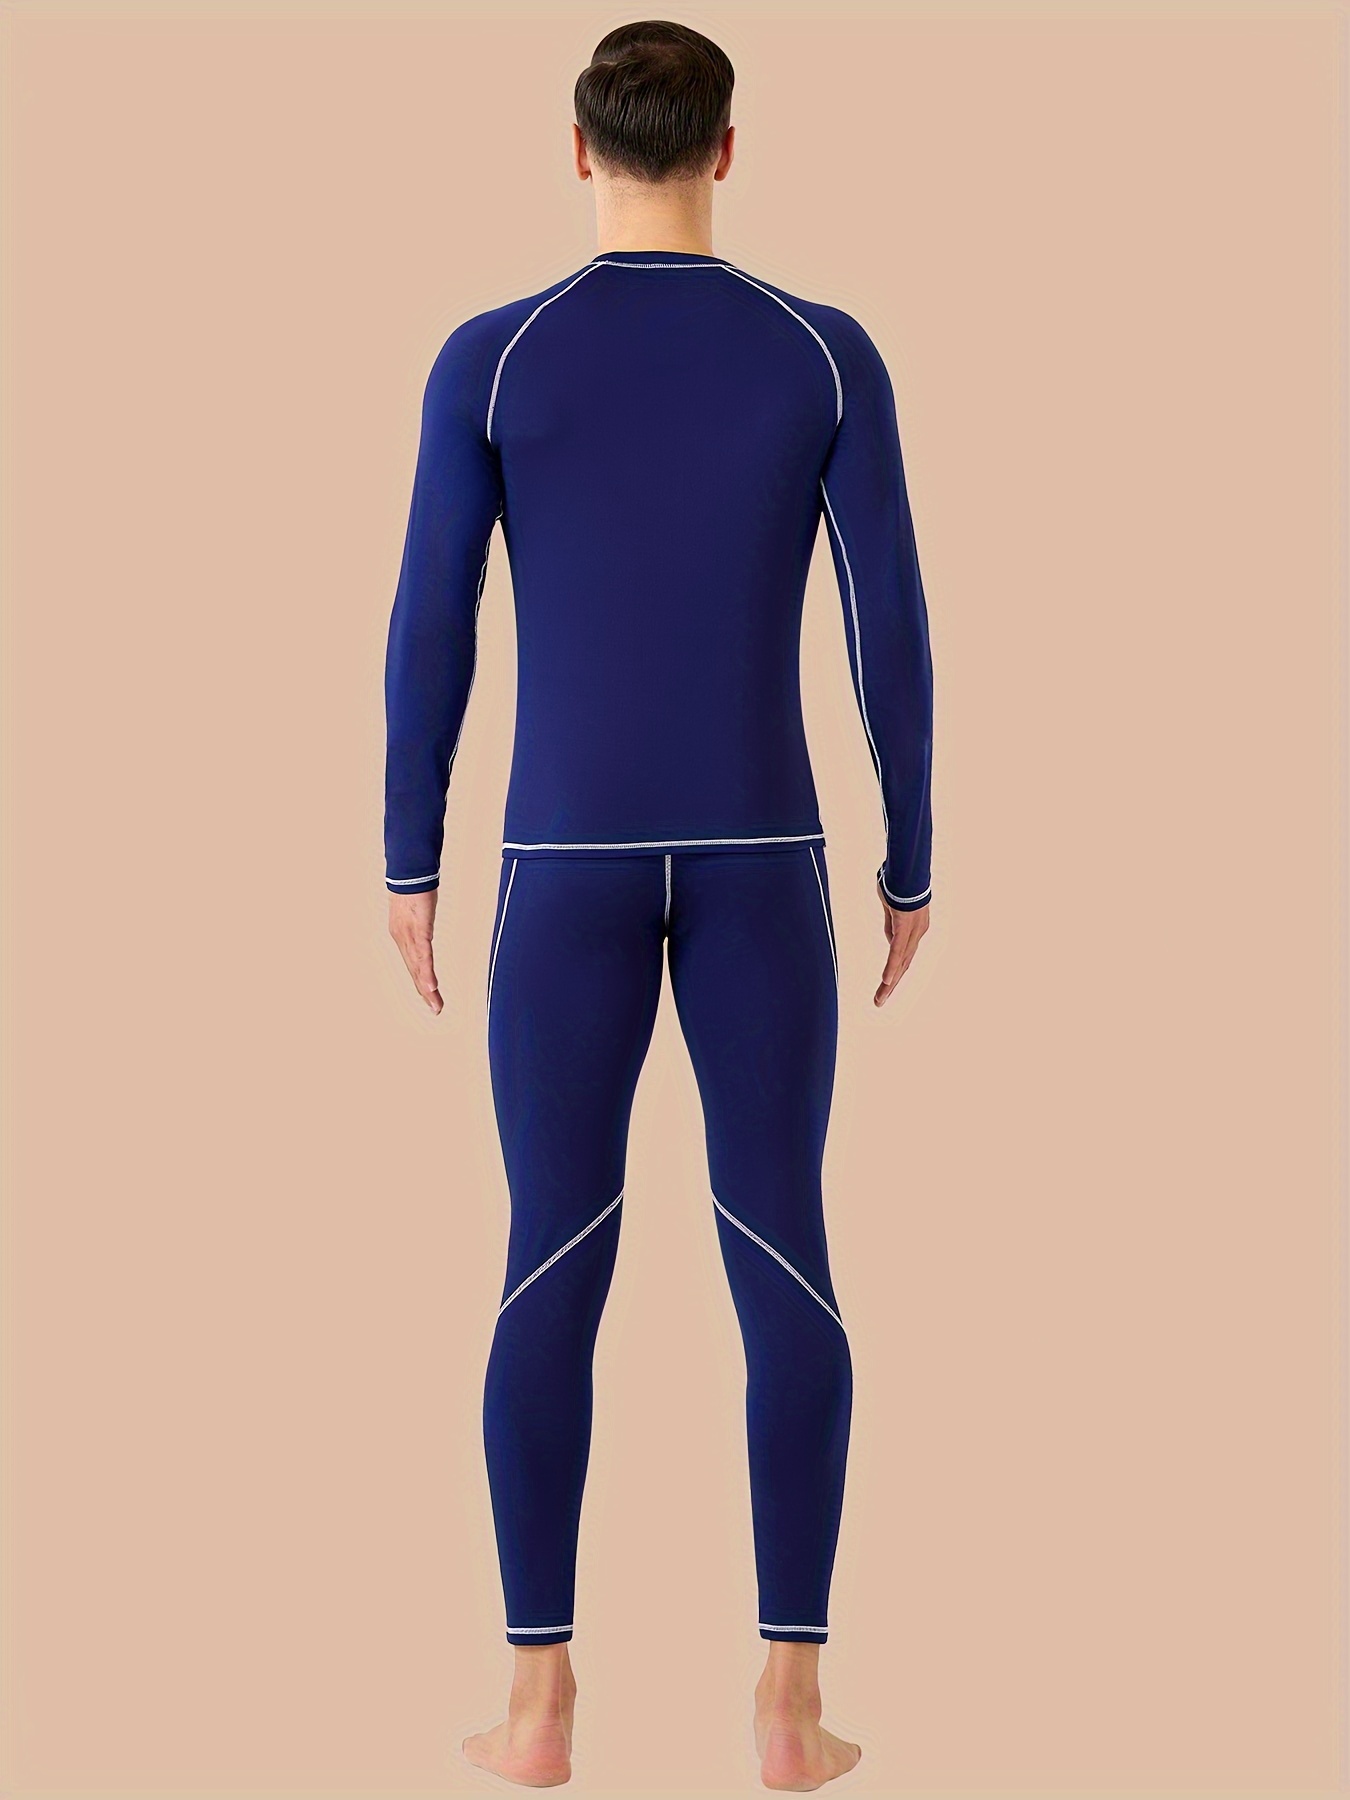 Men's Thermal Underwear Set Winter Base Layer Sport Long Johns Suit for  Skiing